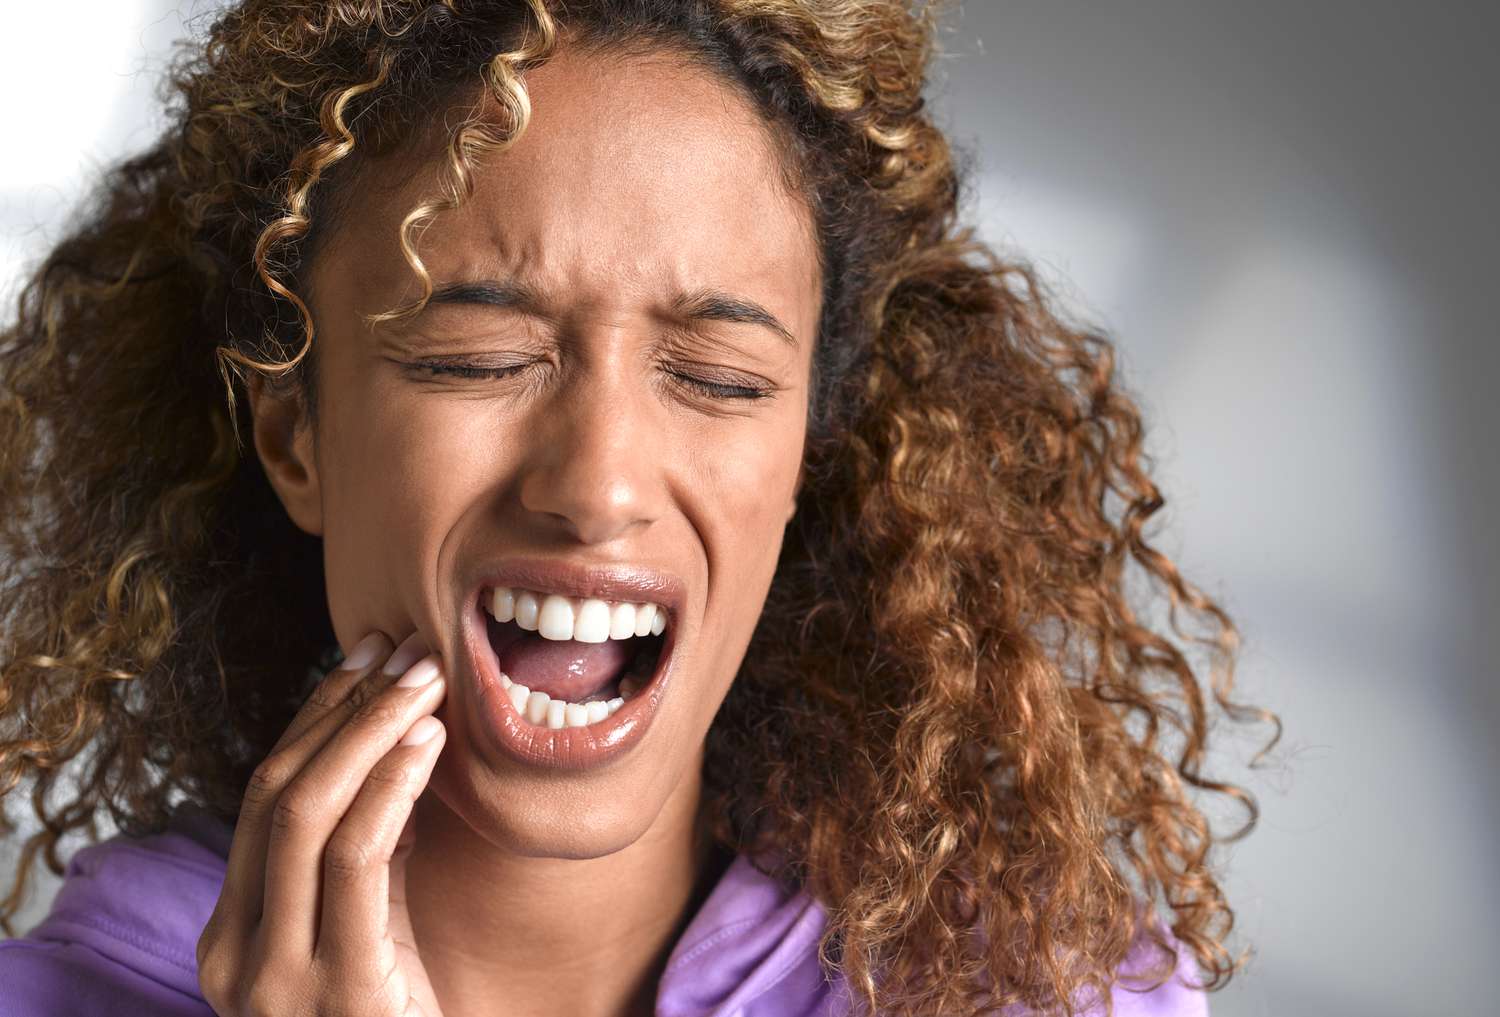 This Simple Methods Will Cure Your Toothaches